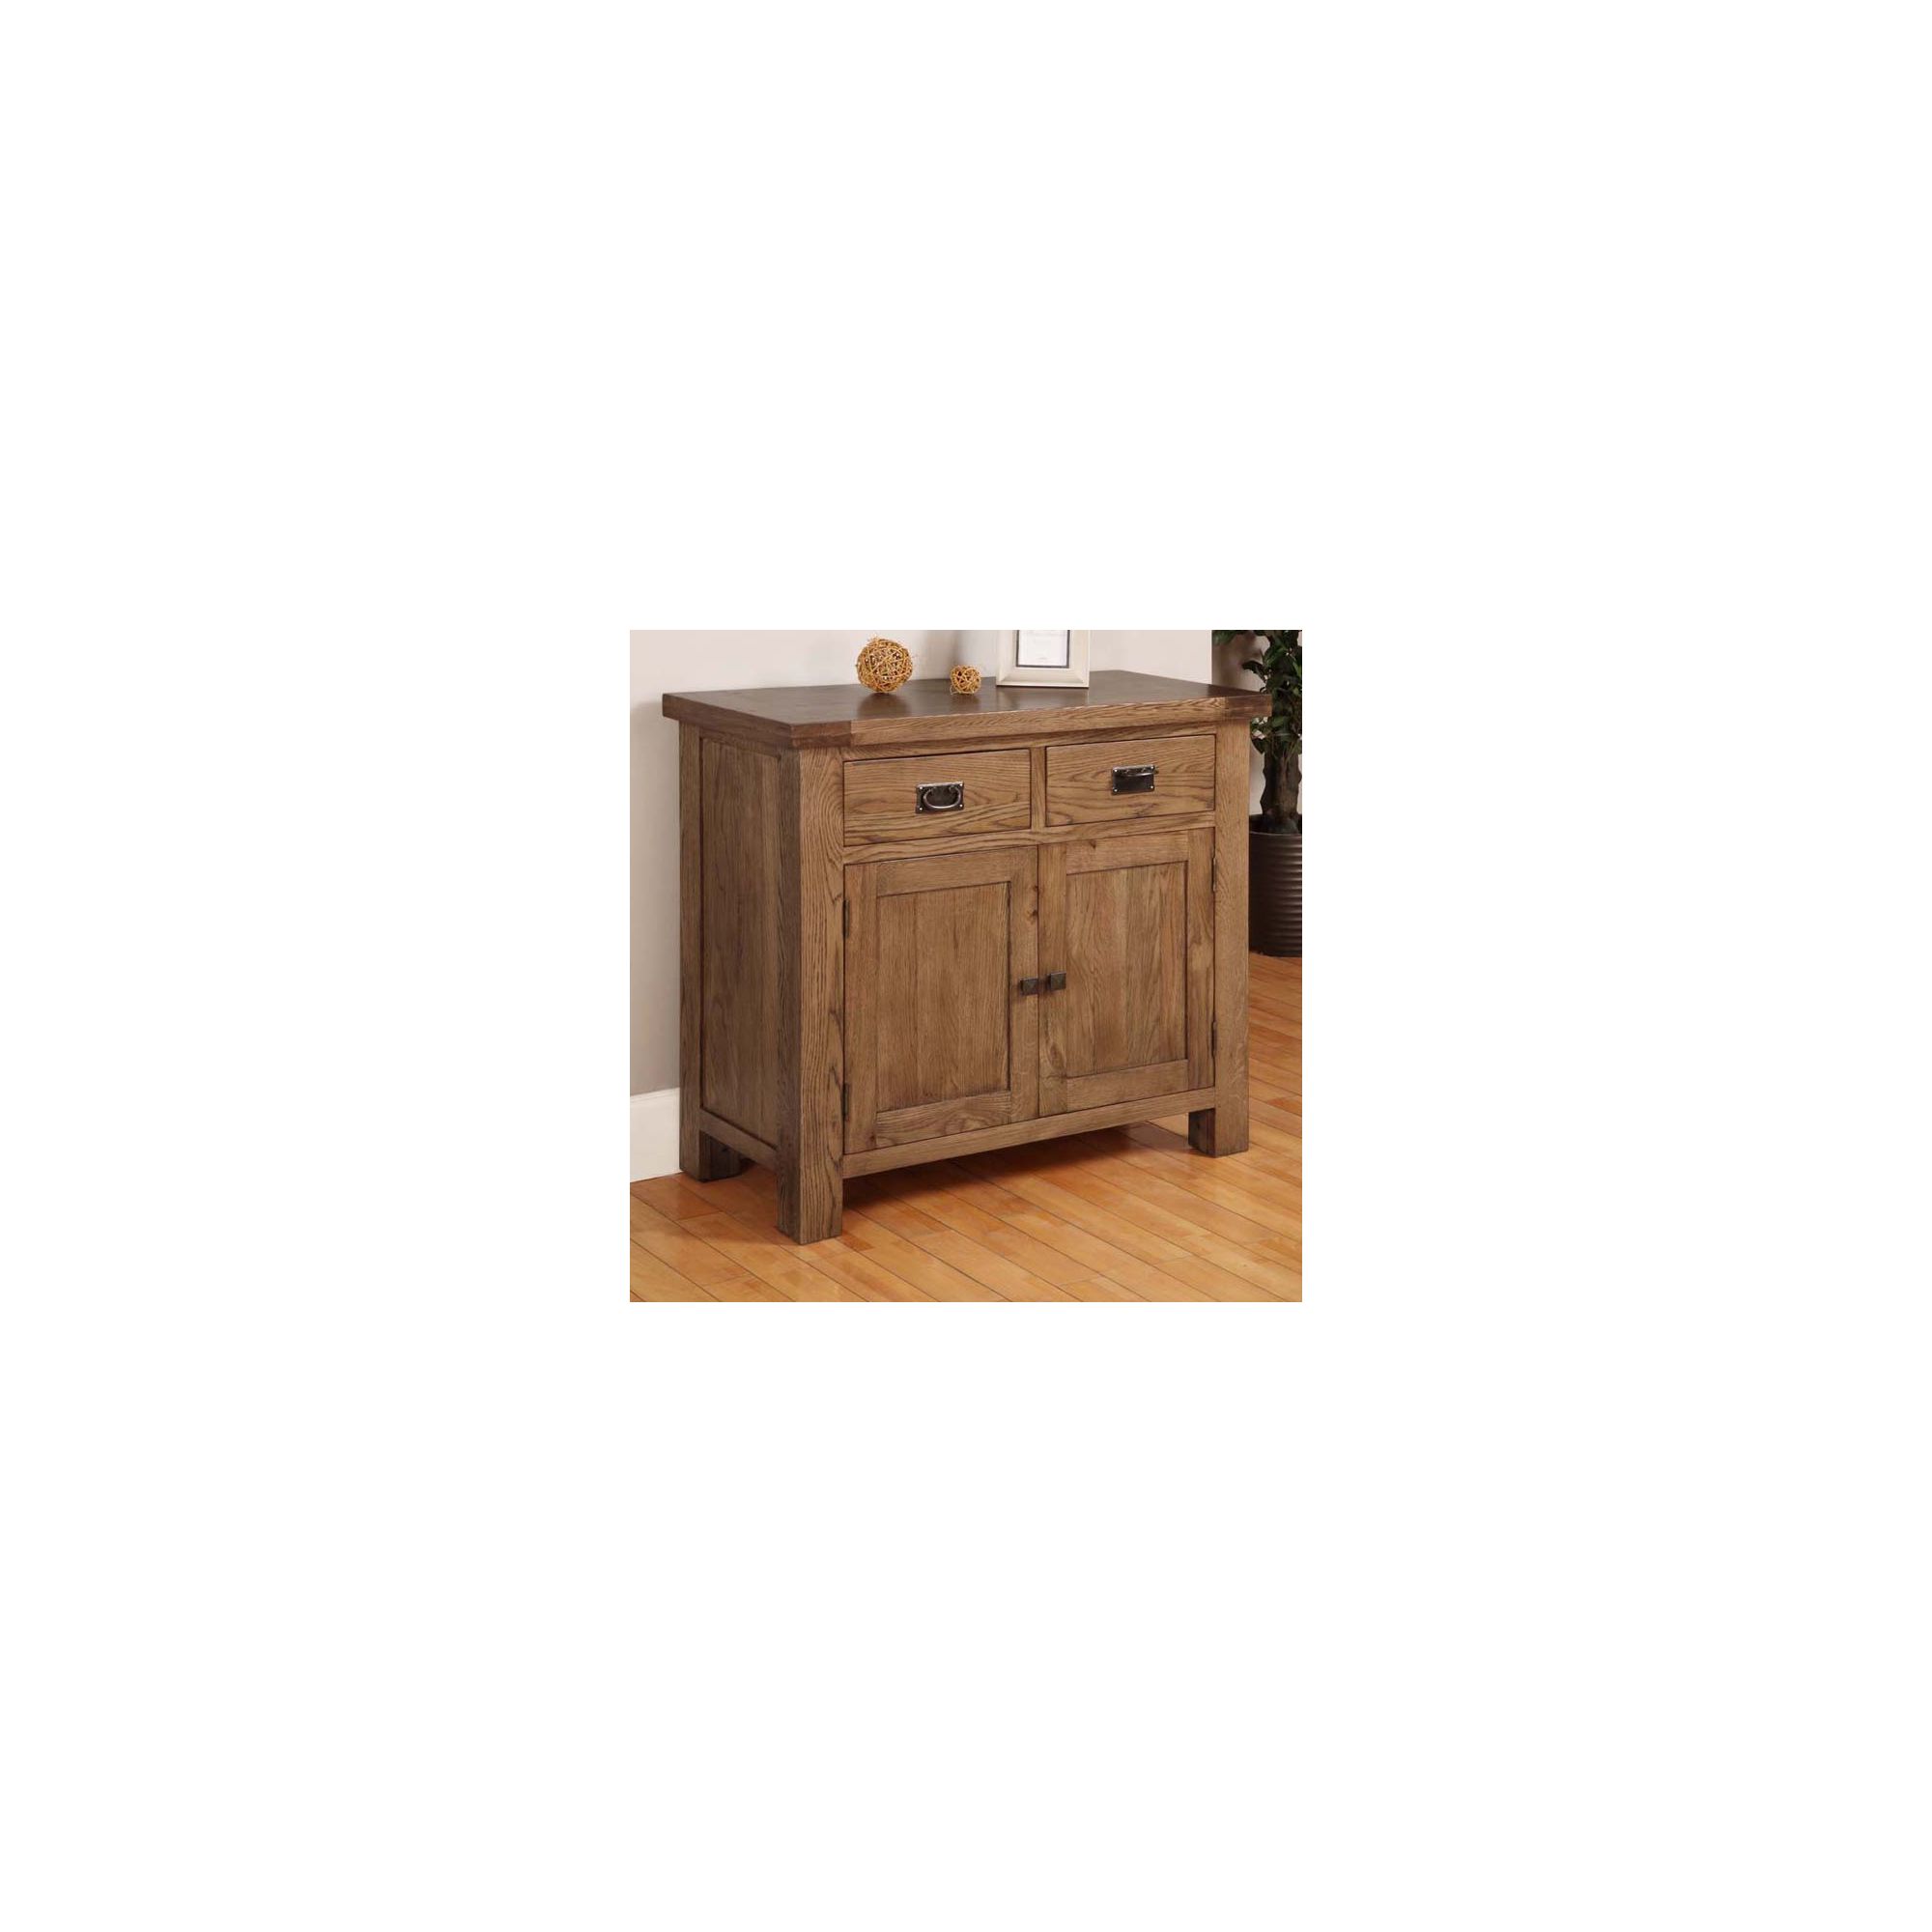 Hawkshead Brooklyn Two Door and Two Drawer Dresser in Rich Patina at Tesco Direct